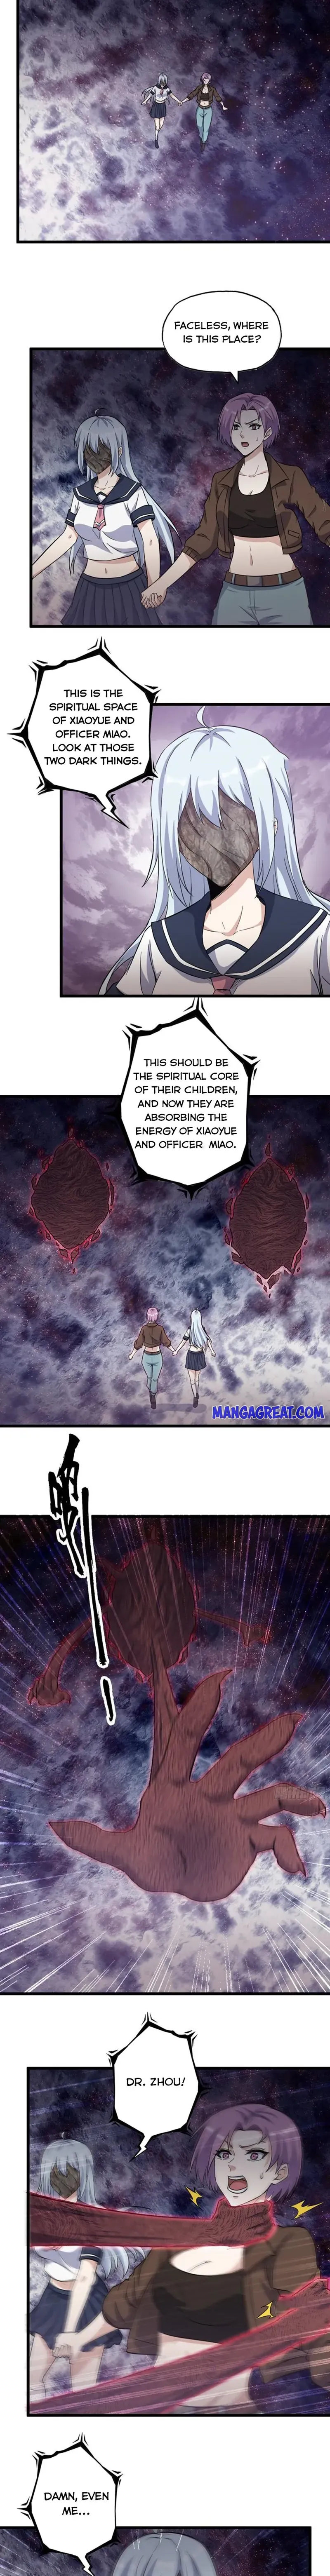 I Am Carrying Gold From The Post-Apocalyptic World Chapter 437 page 2 - MangaWeebs.in